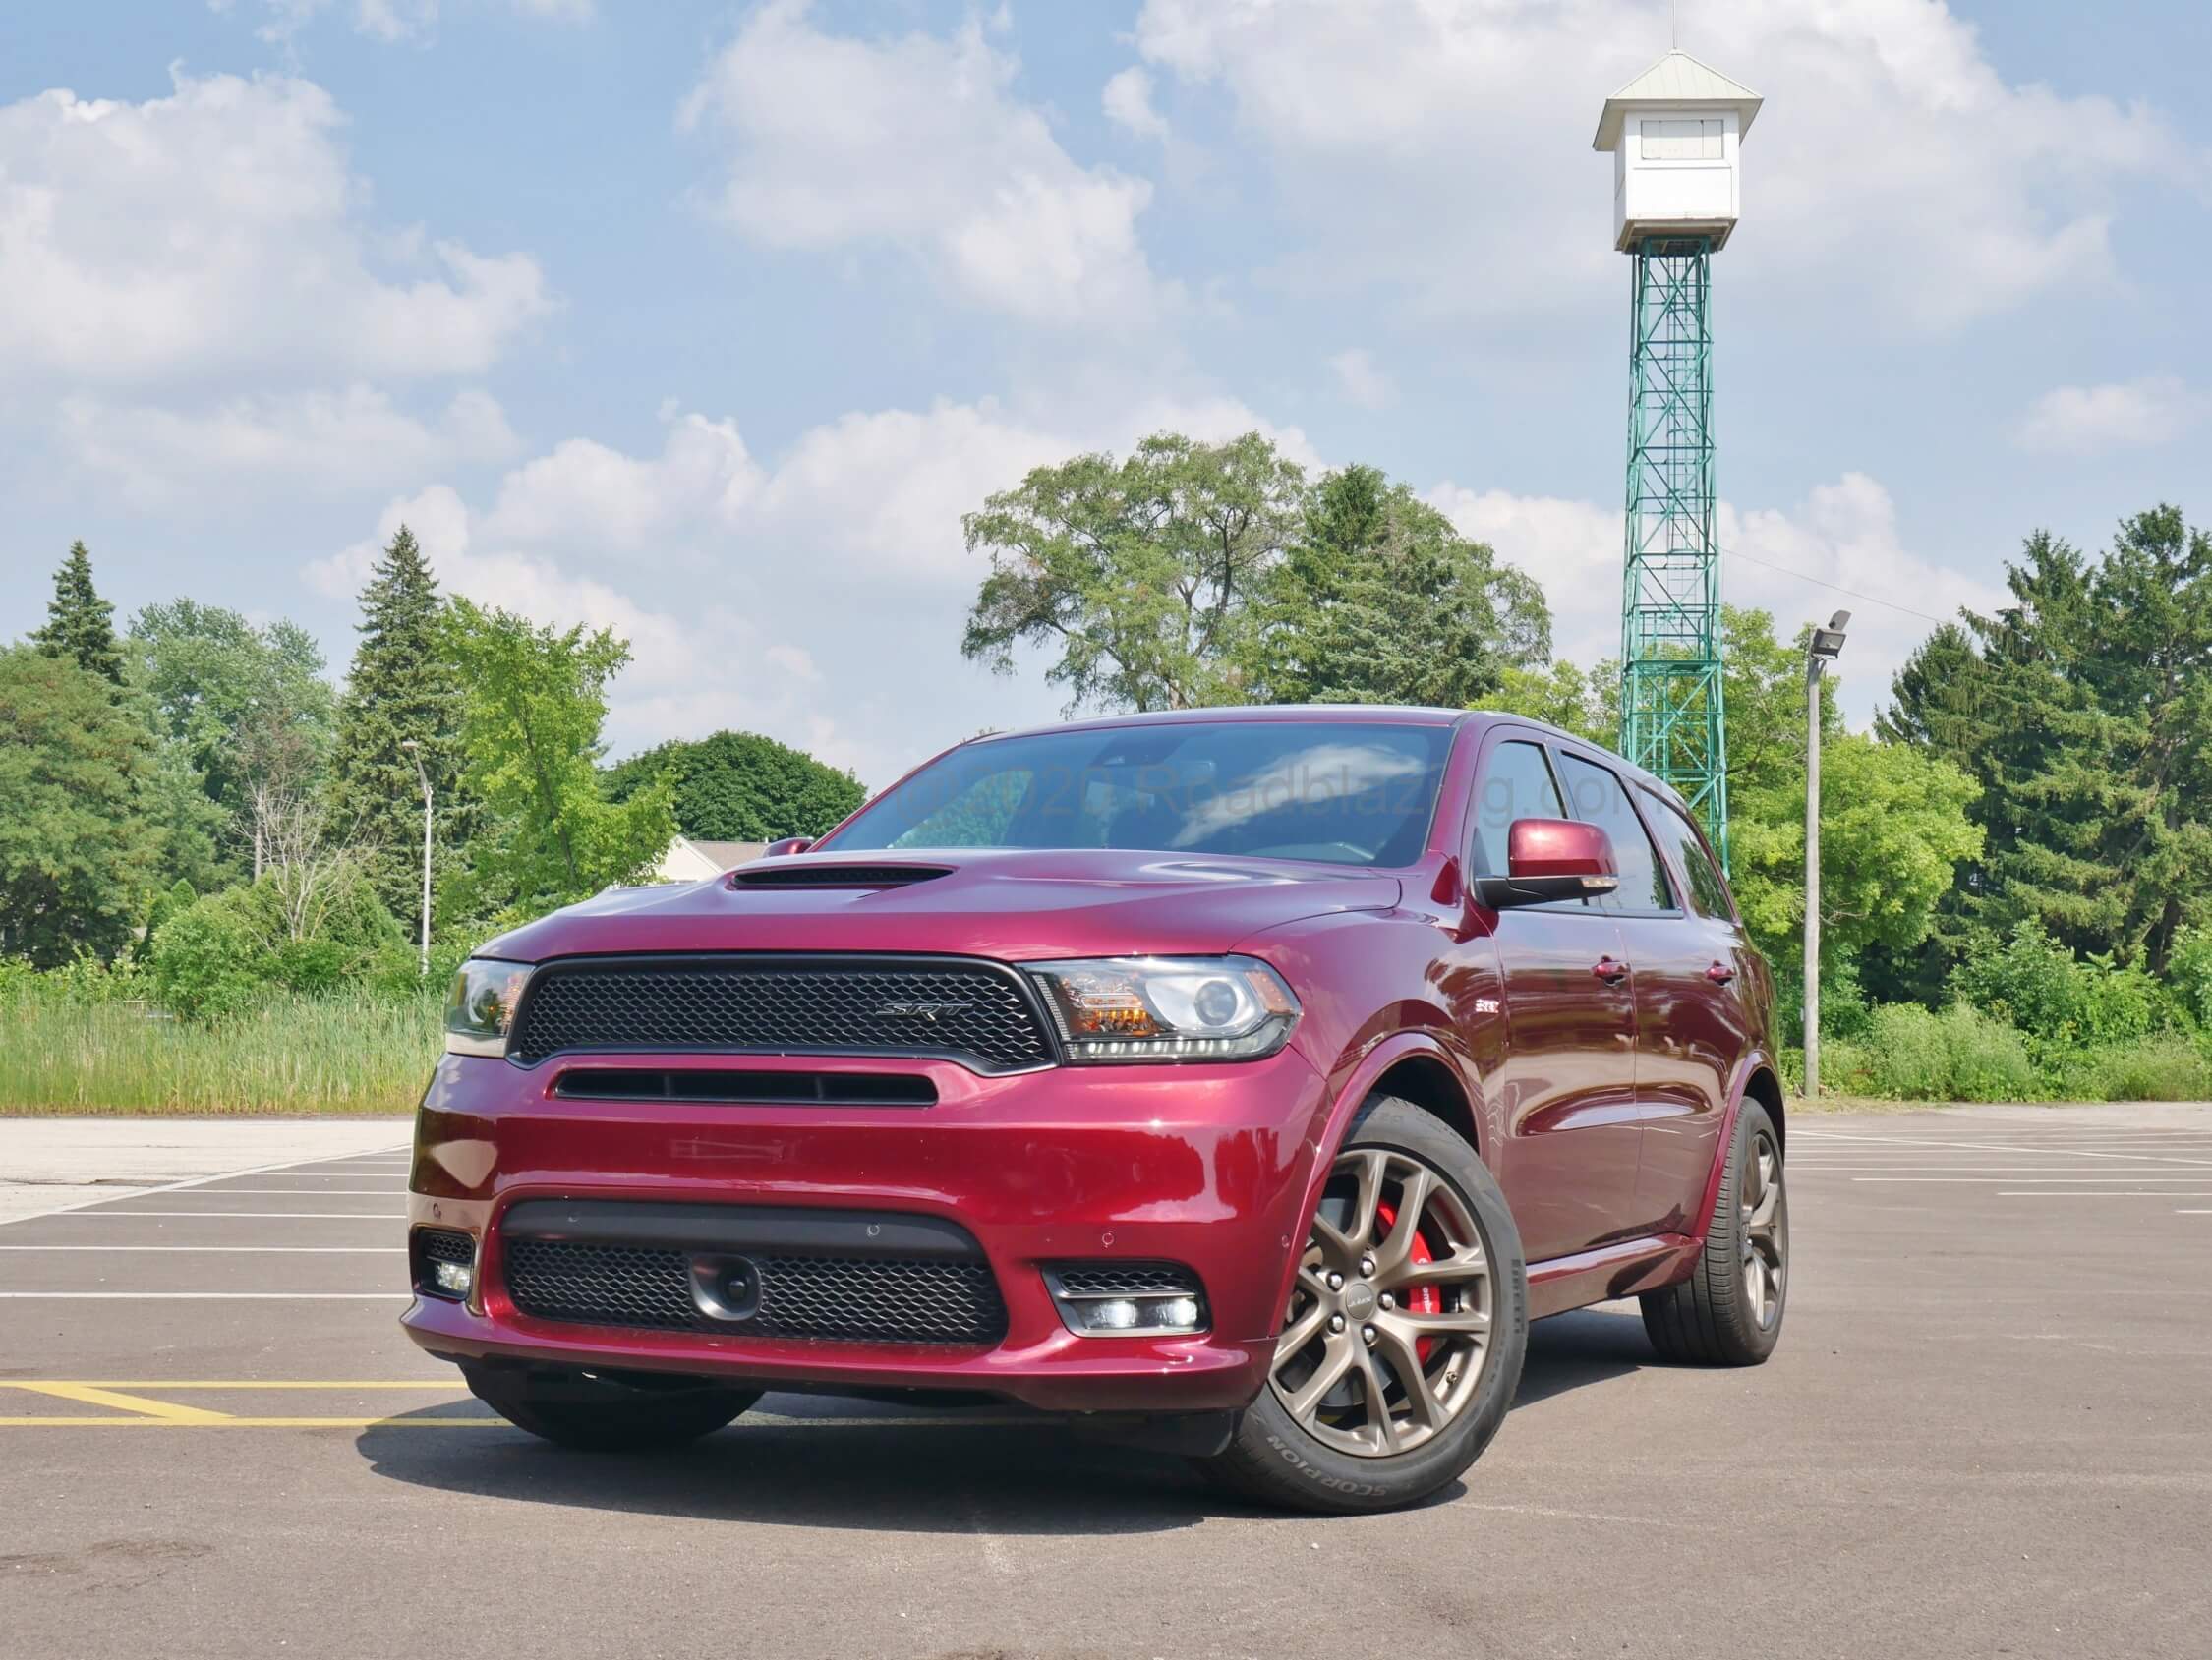 2020 Dodge Durango SRT 392: the quickest 3 Row SUV made in America (until MY 2021 when a Hellcat briefly appears)